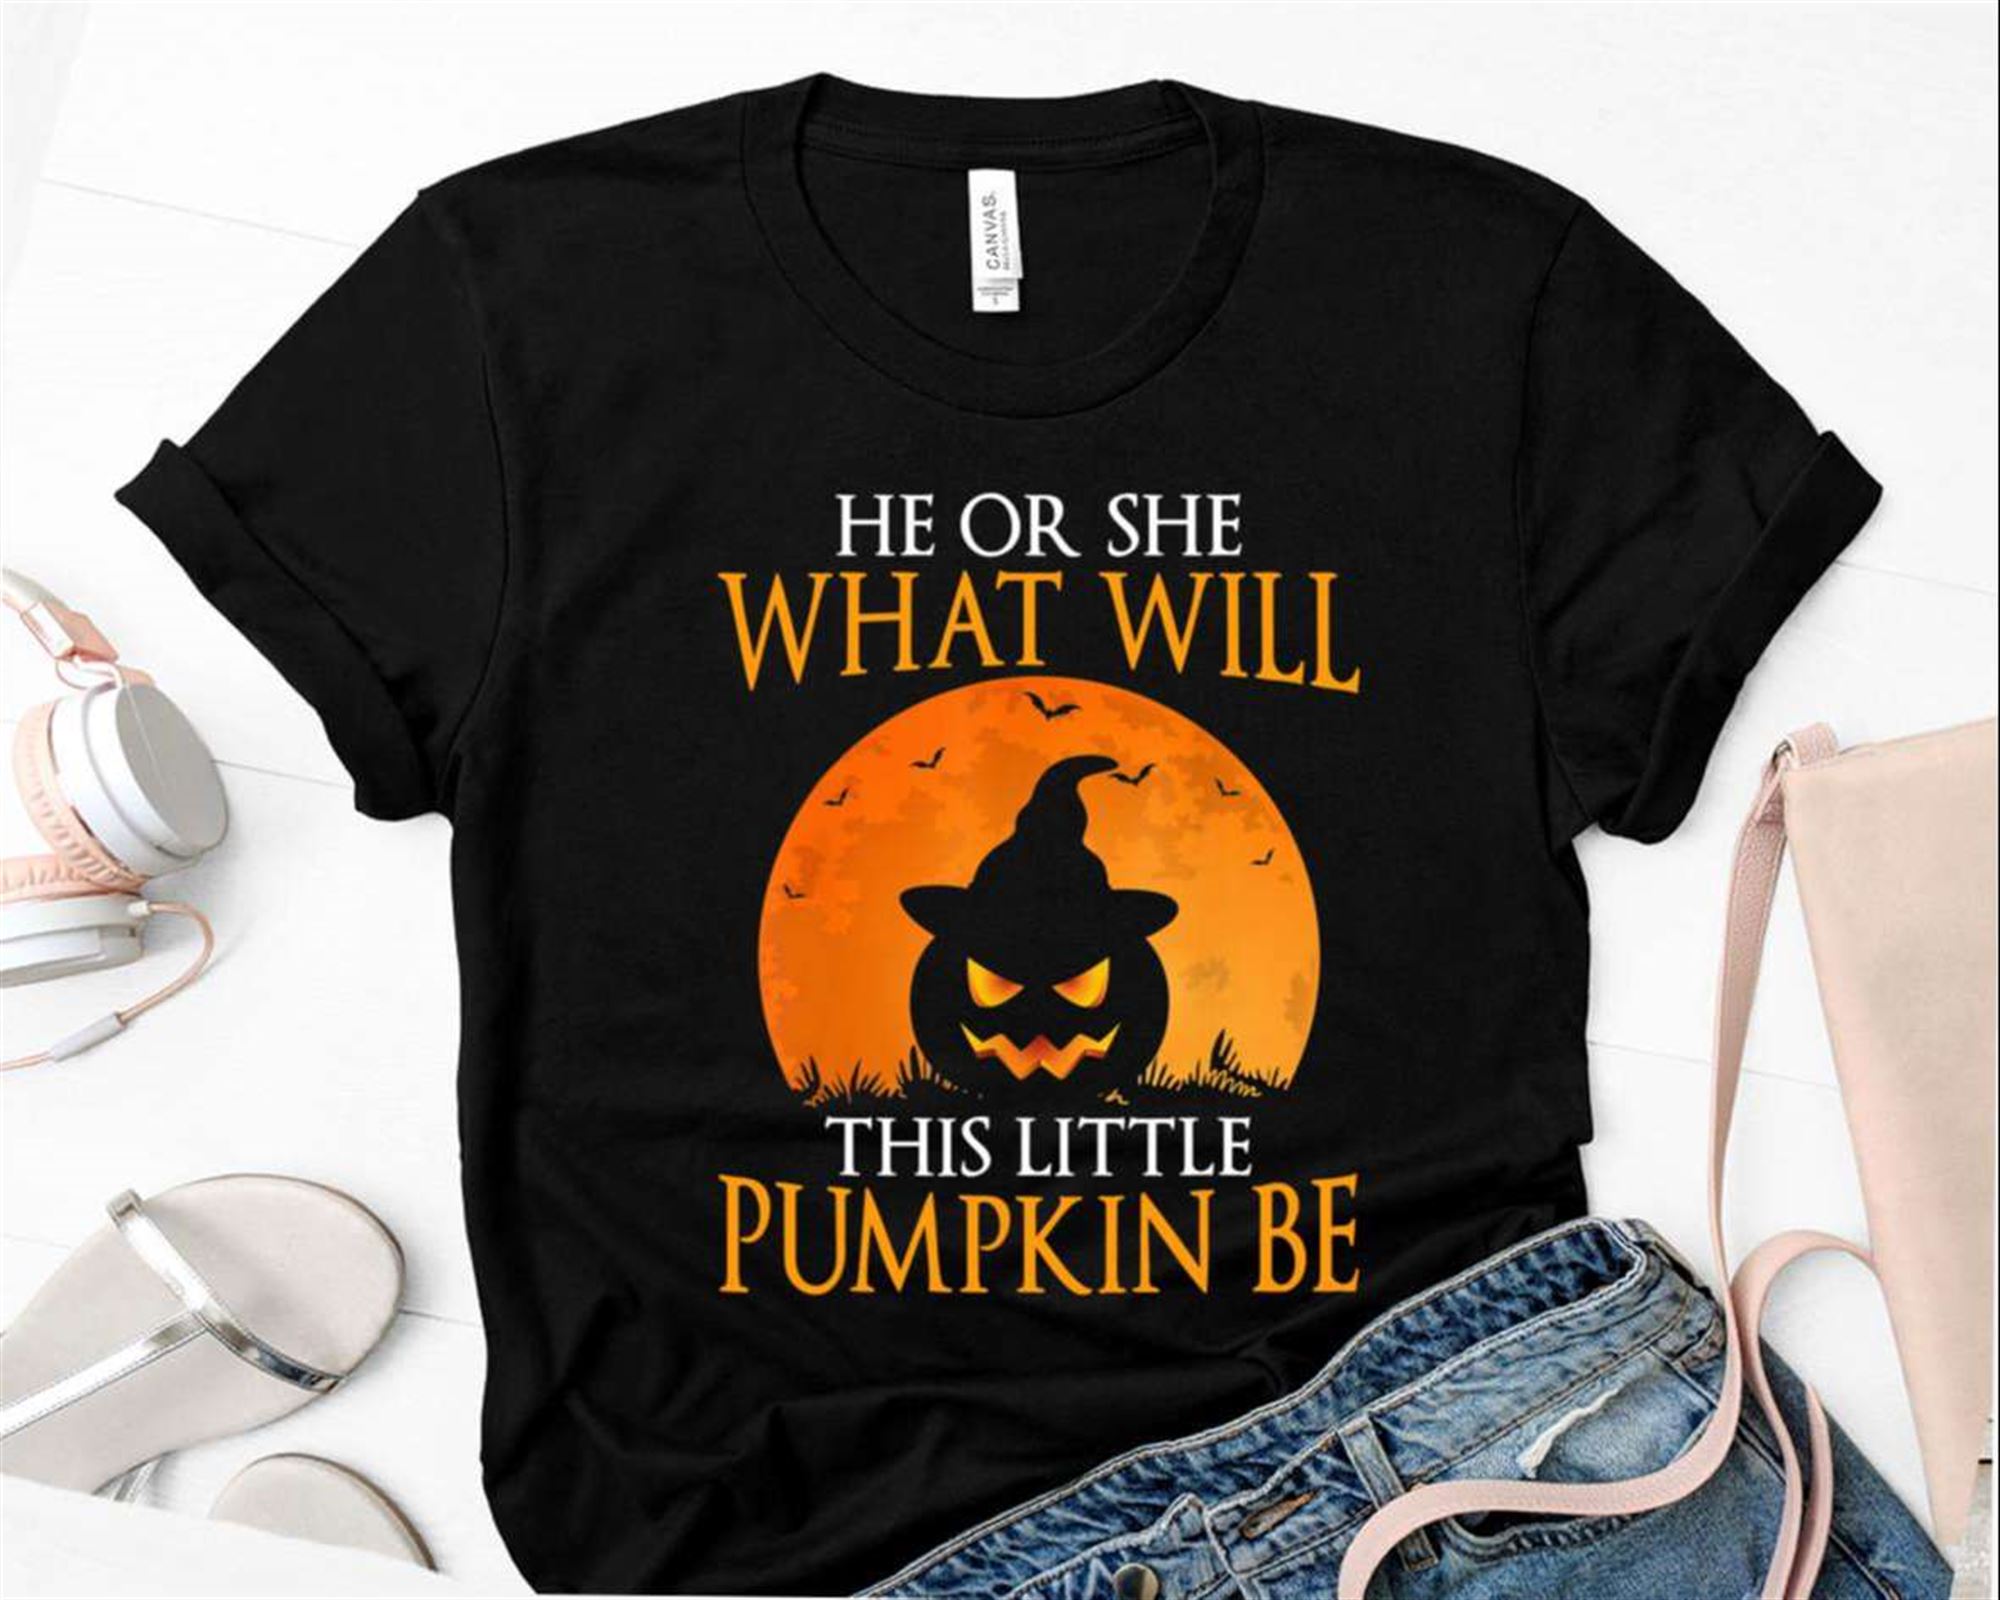 He Or She What Will This Little Pumpkin Be Shirt Funny Halloween Party Costume Gift T-shirt Size Up To 5xl